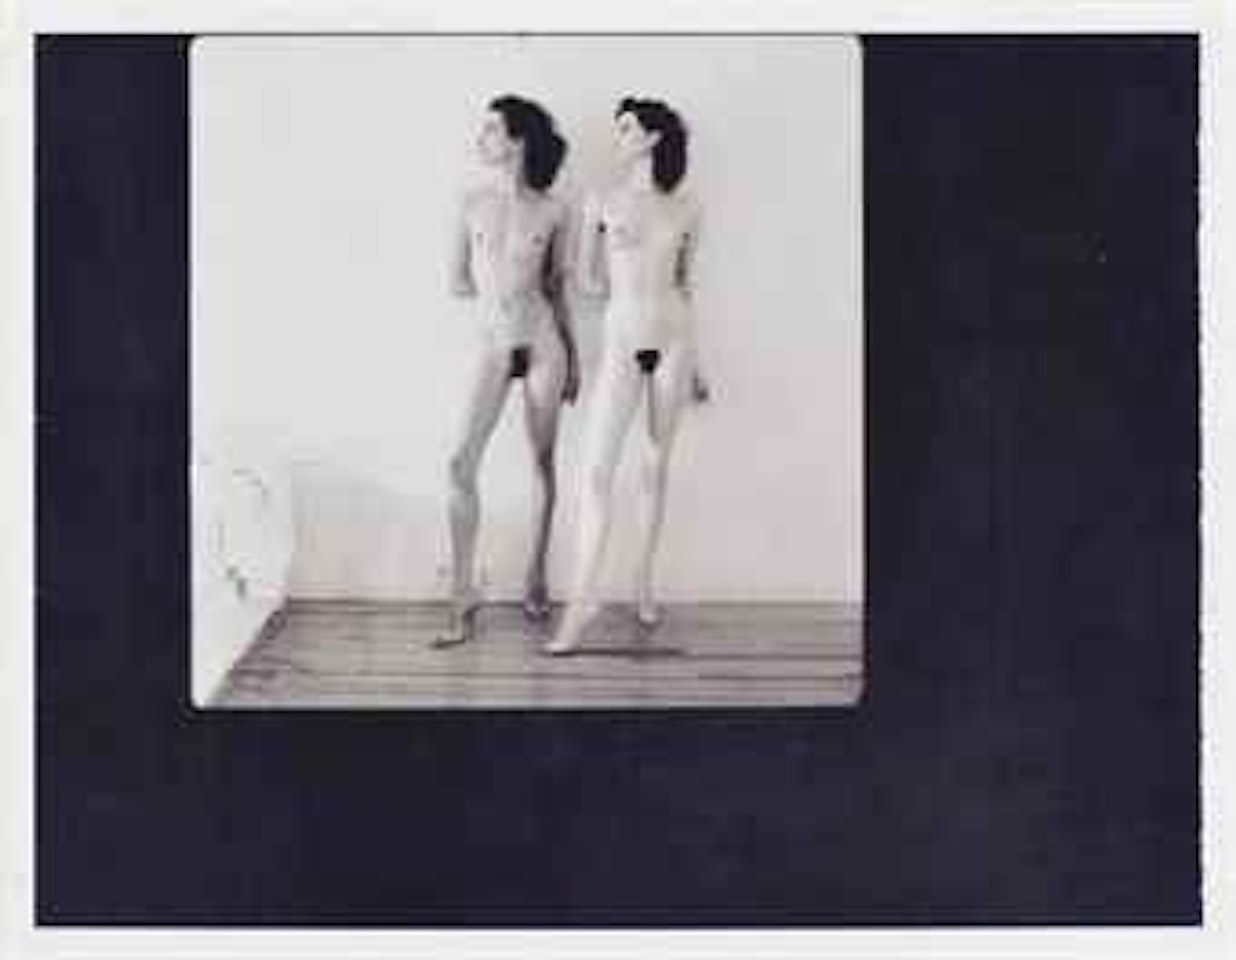 Big Nude VIII – The Two Violettas, 1991 by Helmut Newton